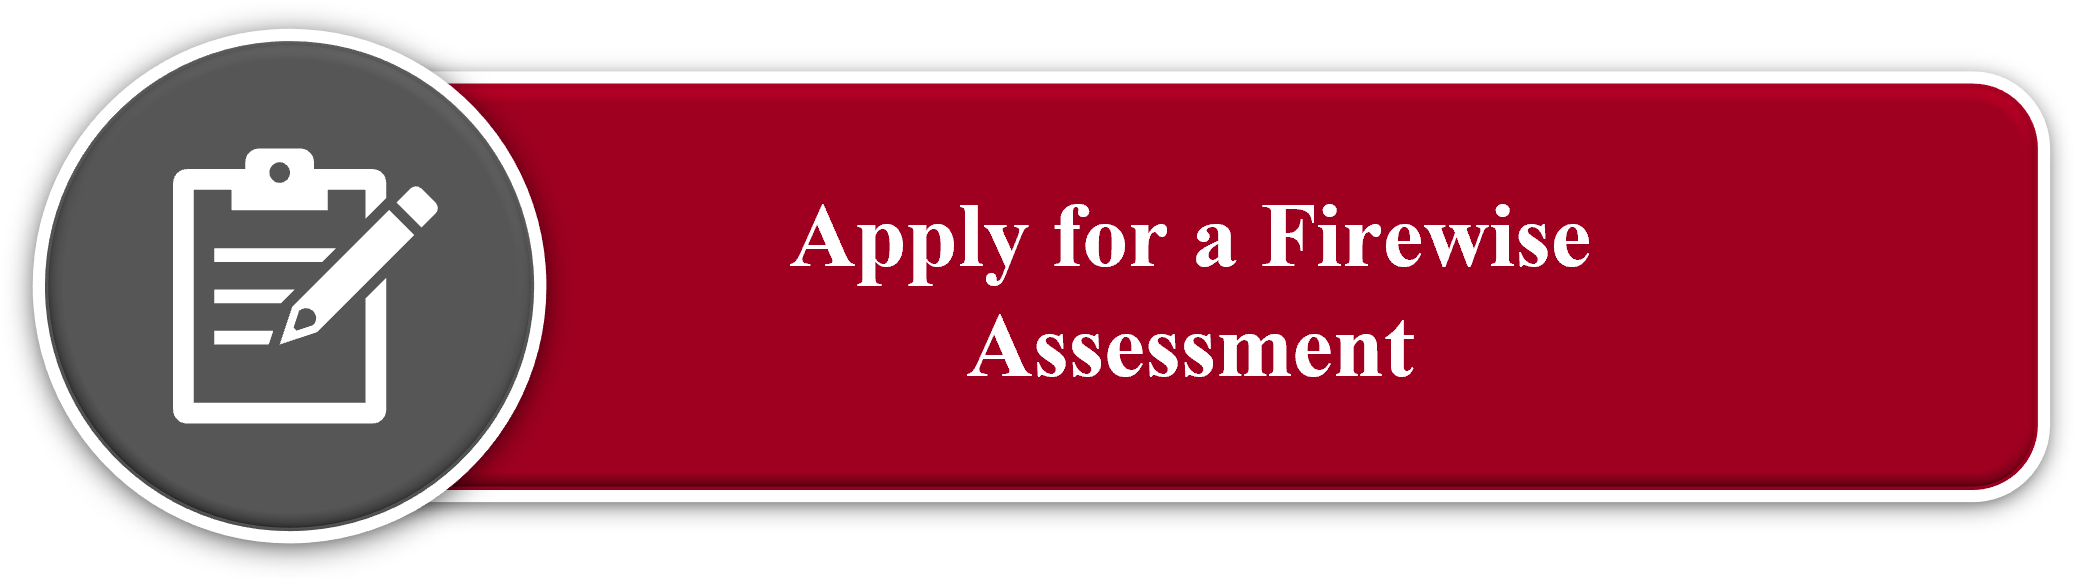  Button Linking to Firewise Assessment Application